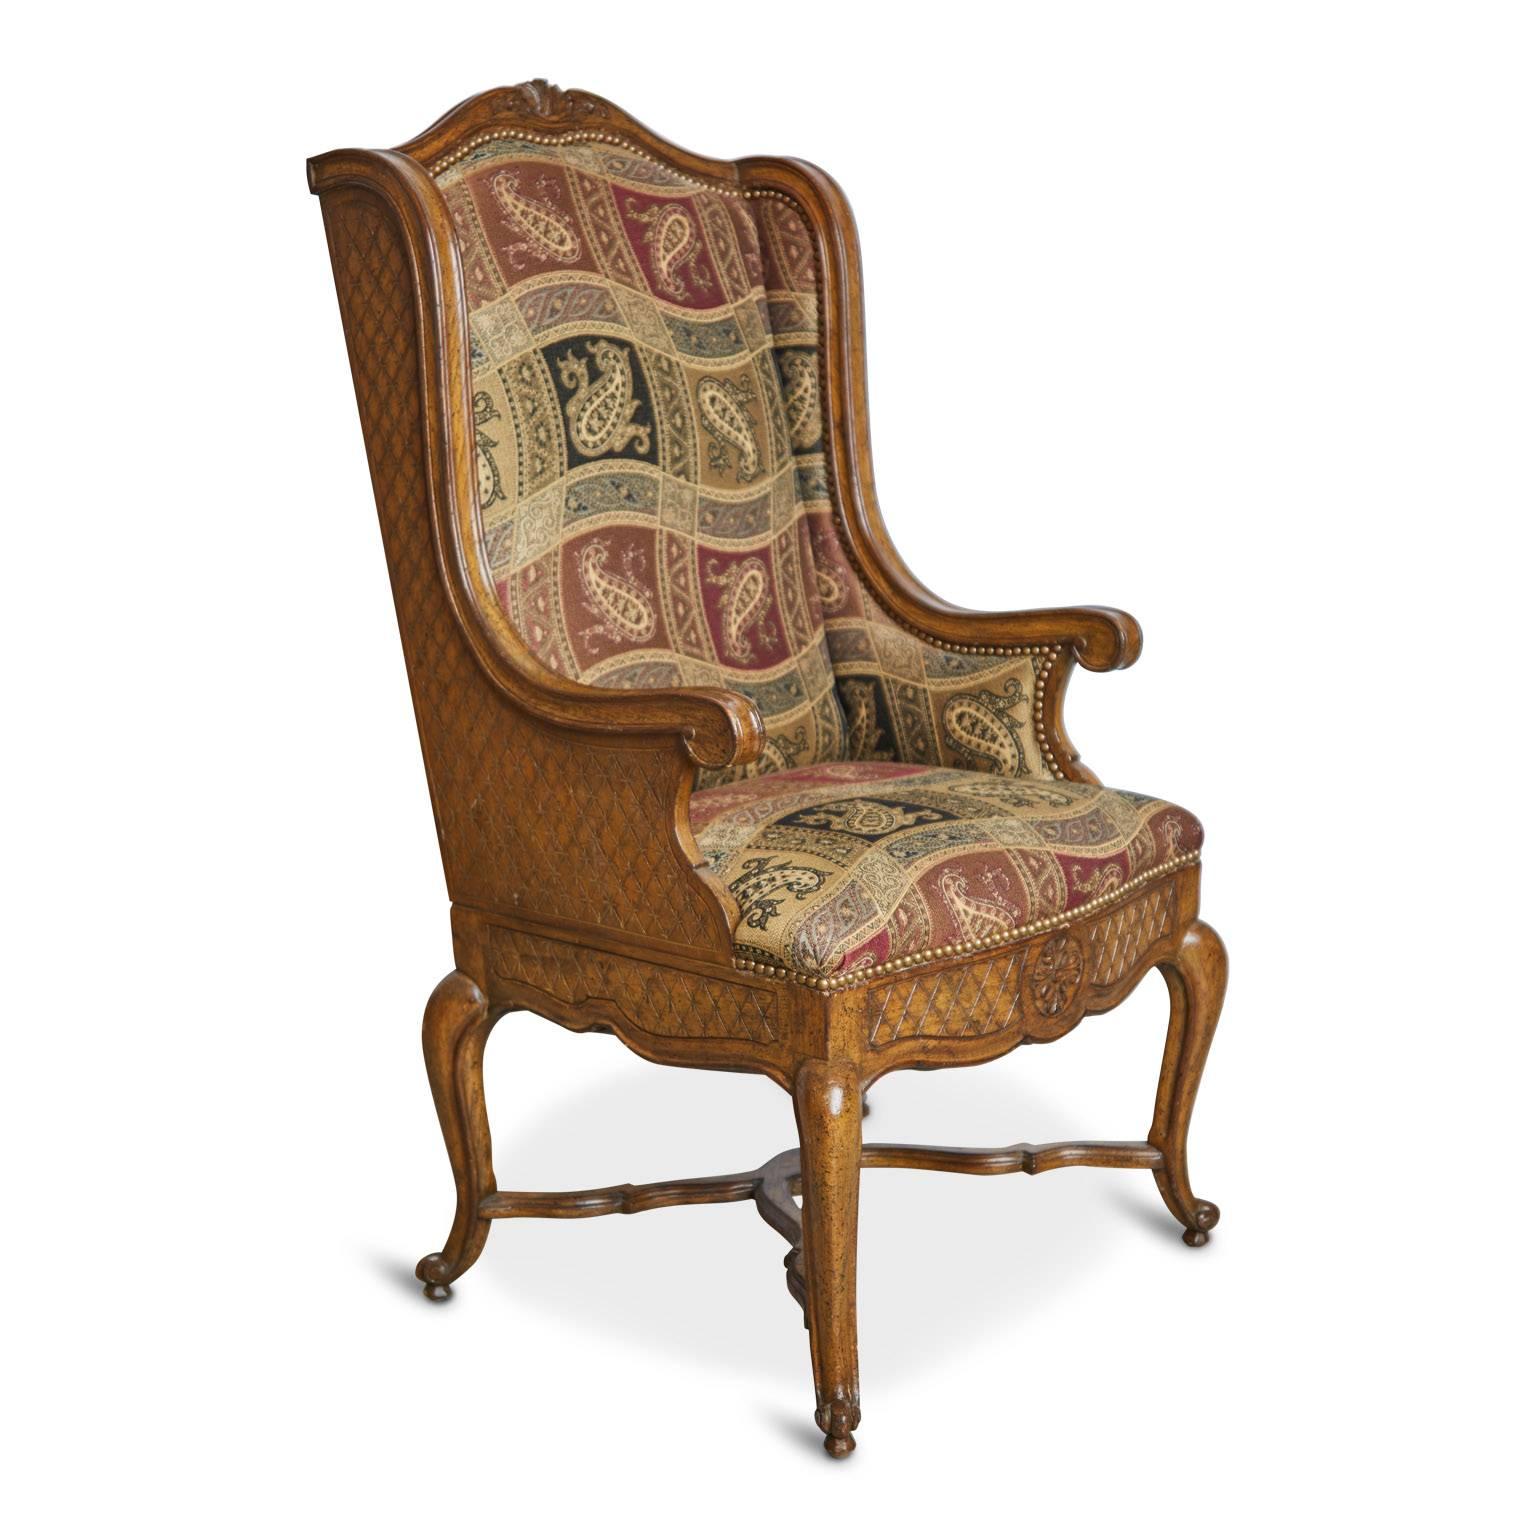 Louis XVI style wingback chair comprised of a carved oak frame and paisley upholstered seats. The curvaceous frame of this royal looking armchair features scrolled arms, cabriole legs with an adjoining X-base, feuilles d'acanthe sculpted on the